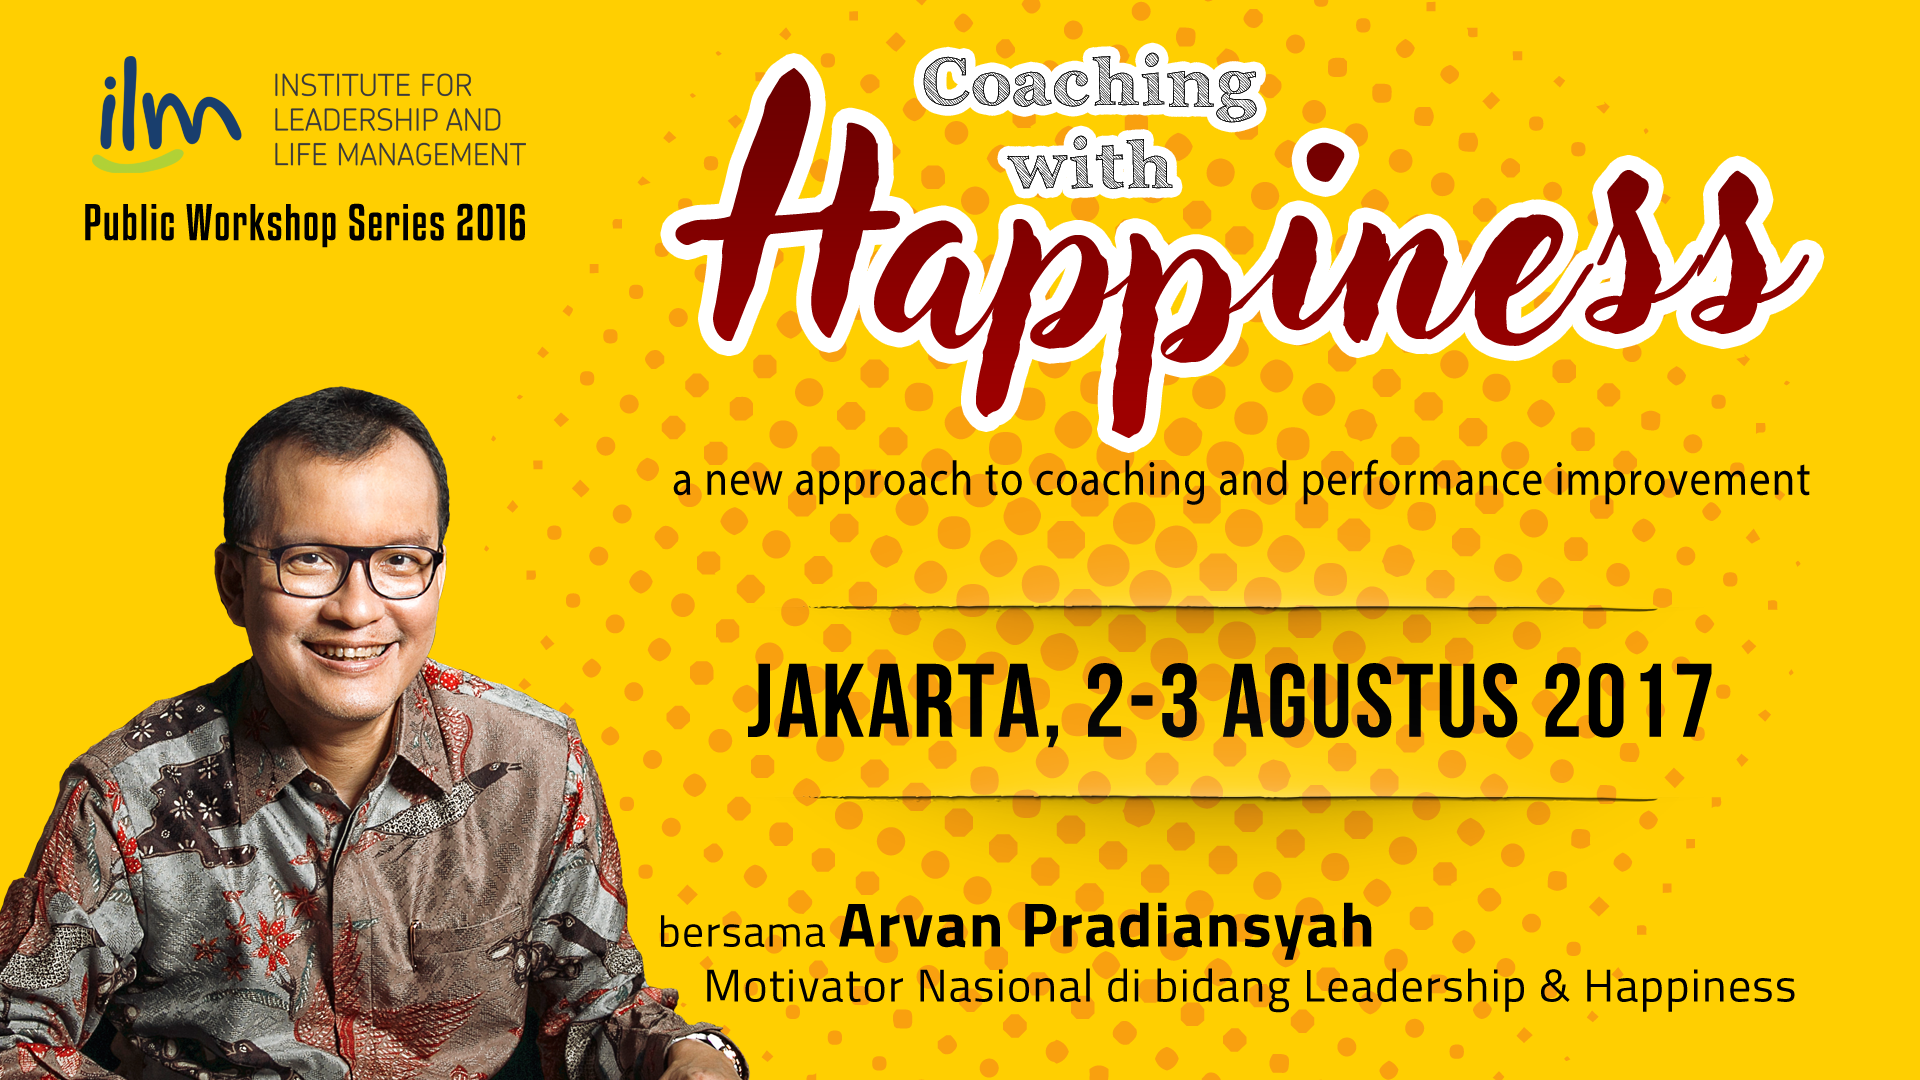 Coaching with Happiness